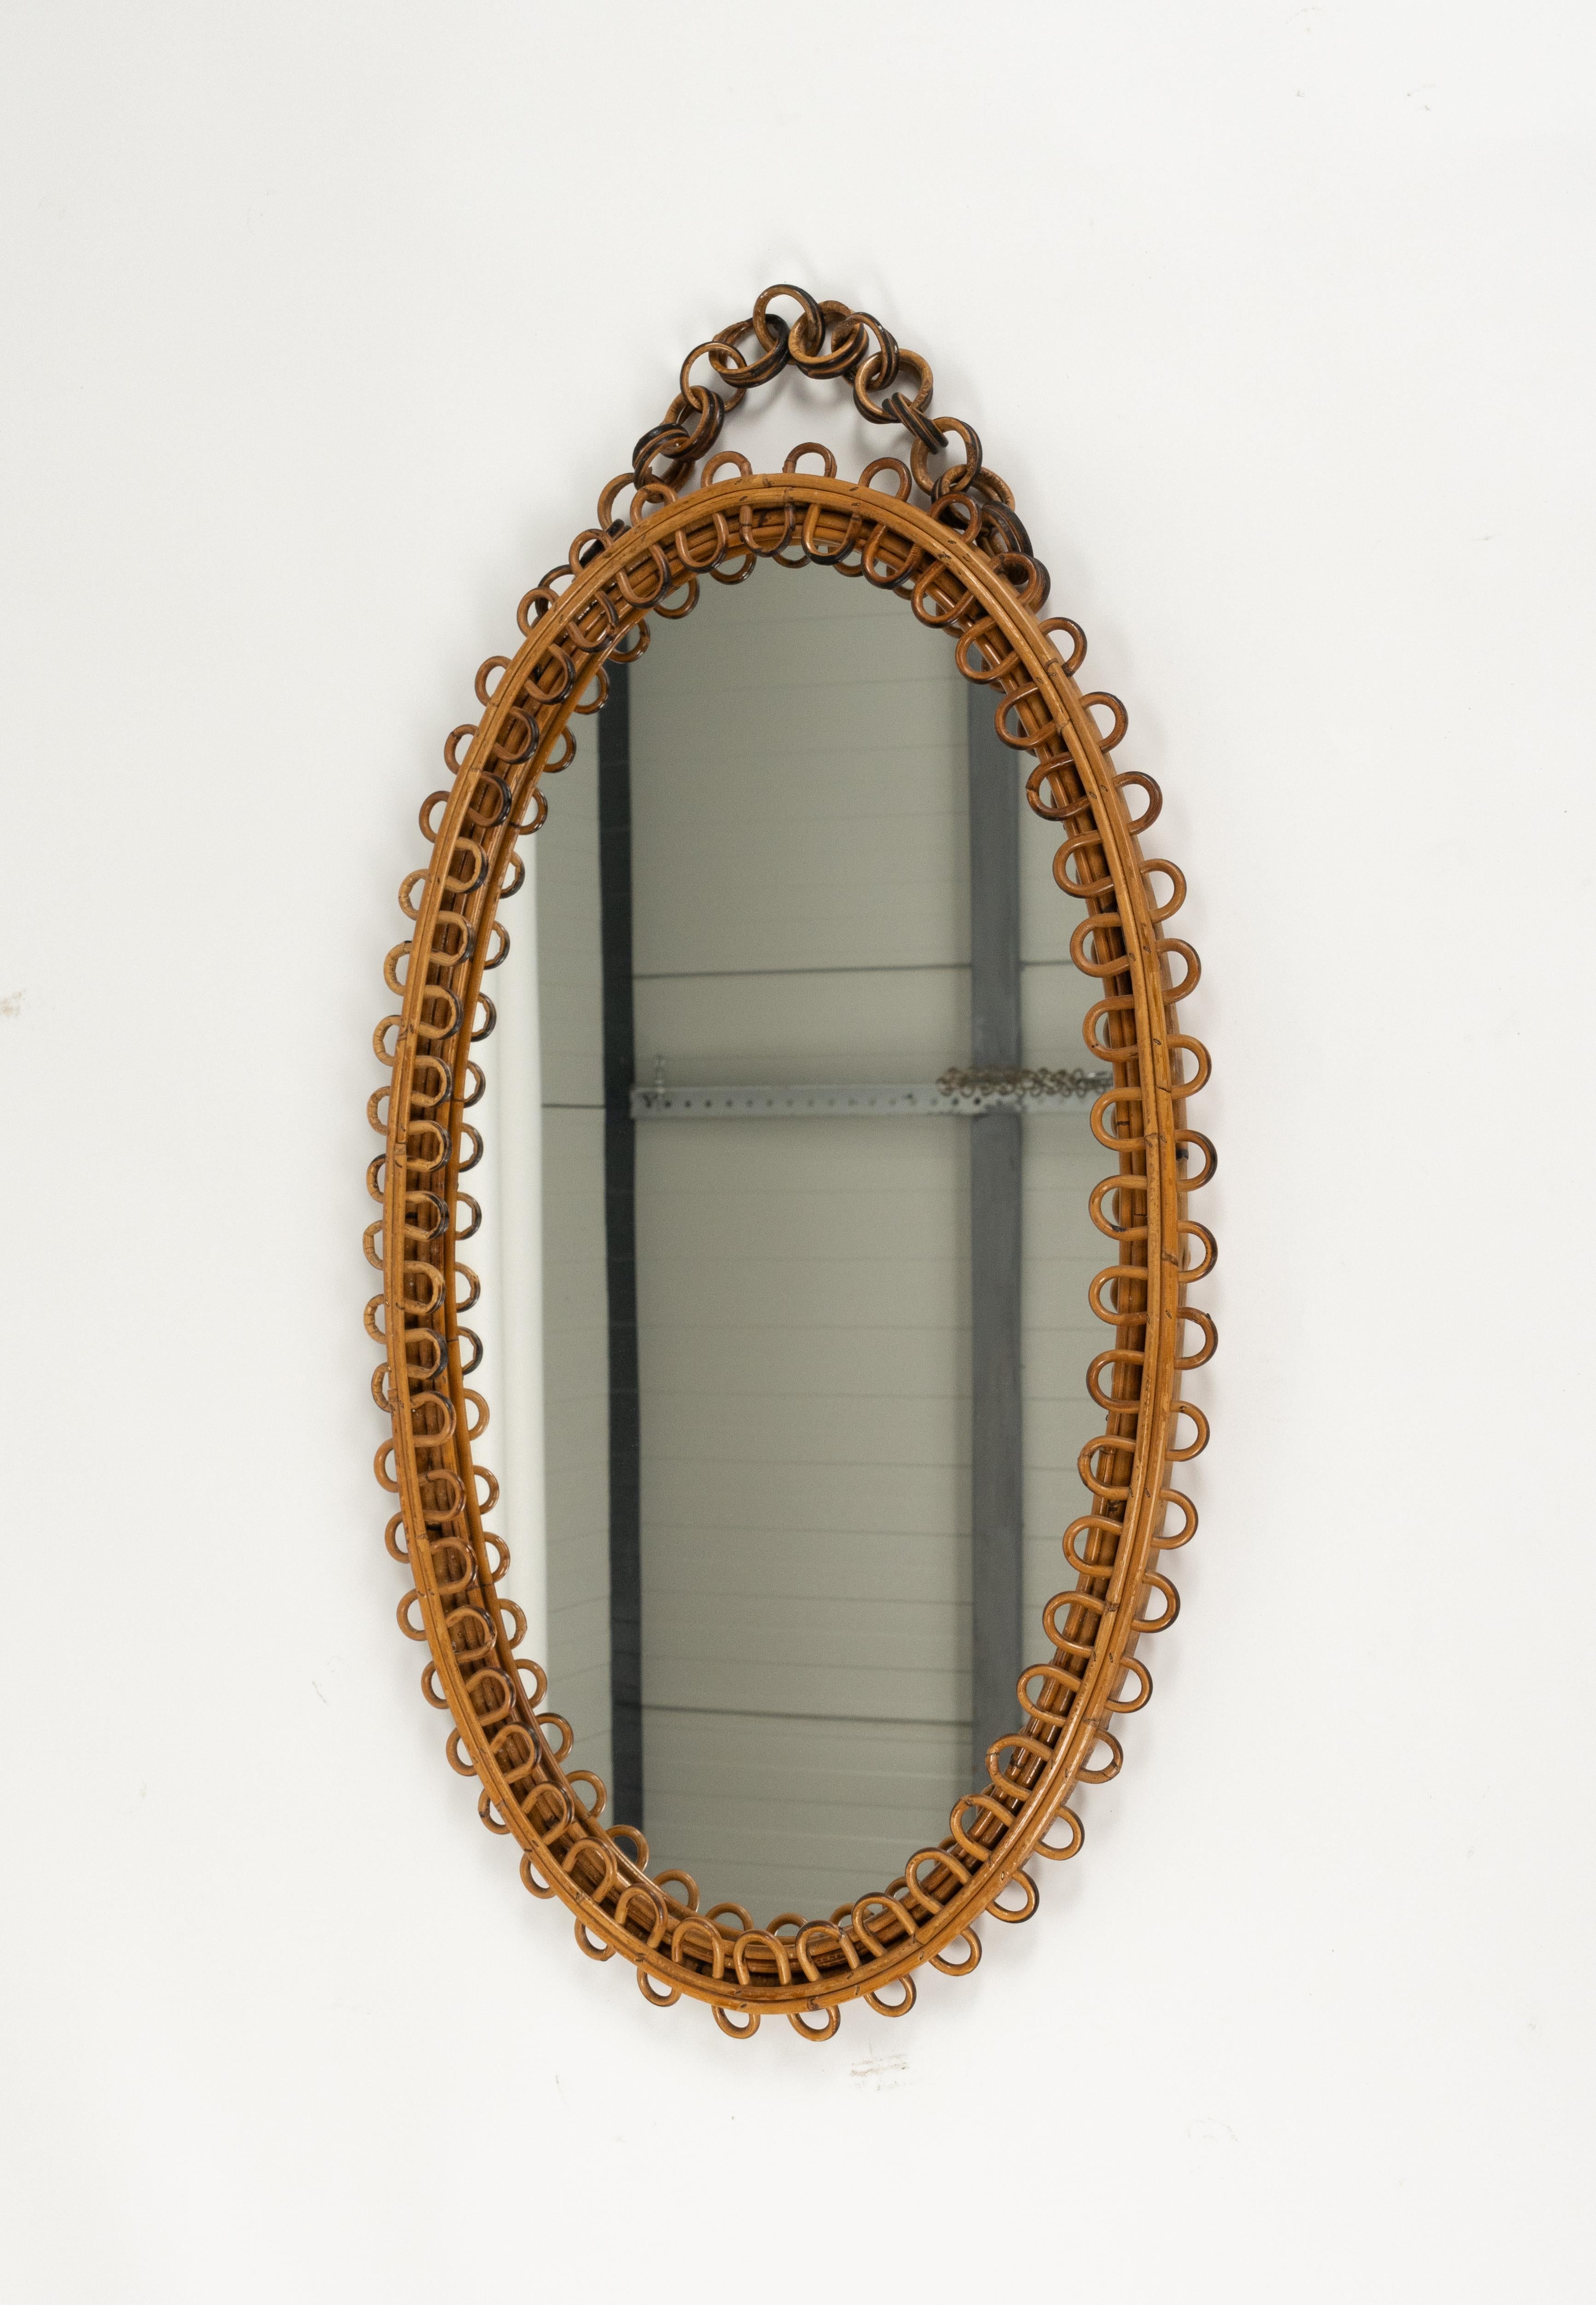 Rattan and Bamboo Oval Wall Mirror with Chain Franco Albini Style, Italy, 1960s For Sale 5